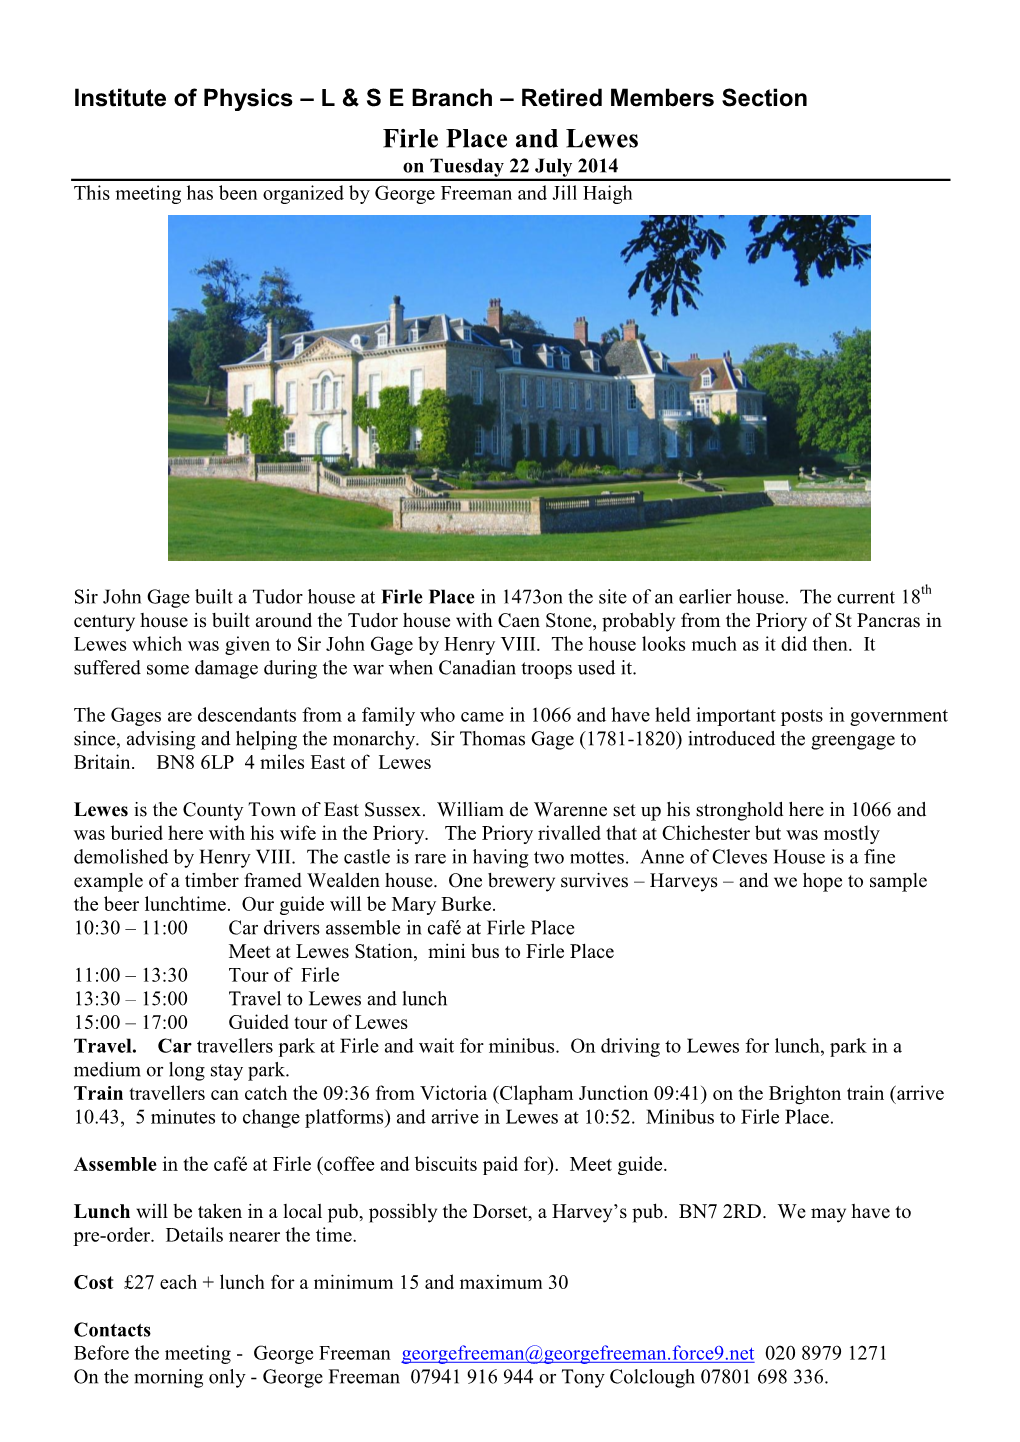 Firle Place and Lewes on Tuesday 22 July 2014 This Meeting Has Been Organized by George Freeman and Jill Haigh